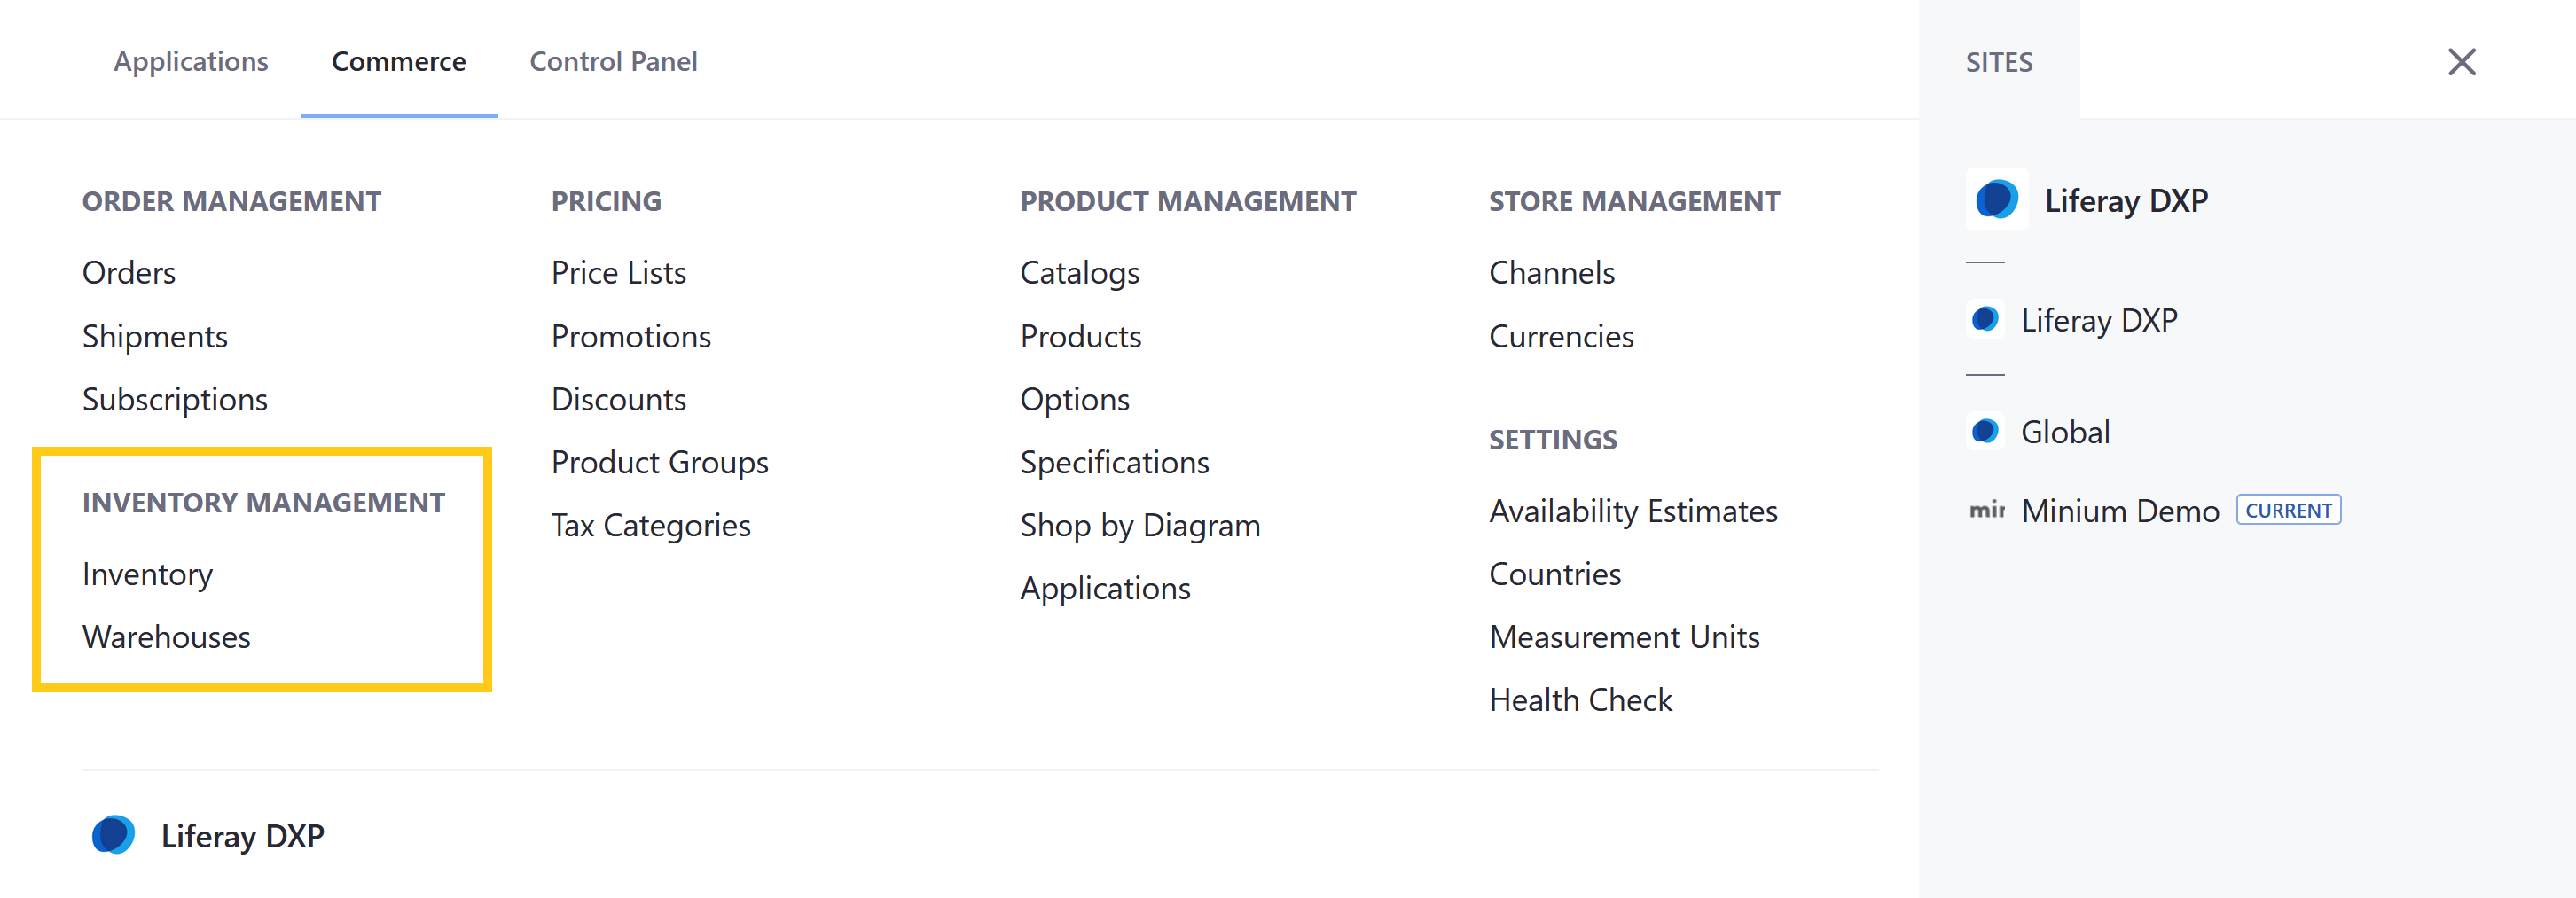 Control access to Inventory Management applications and resources.